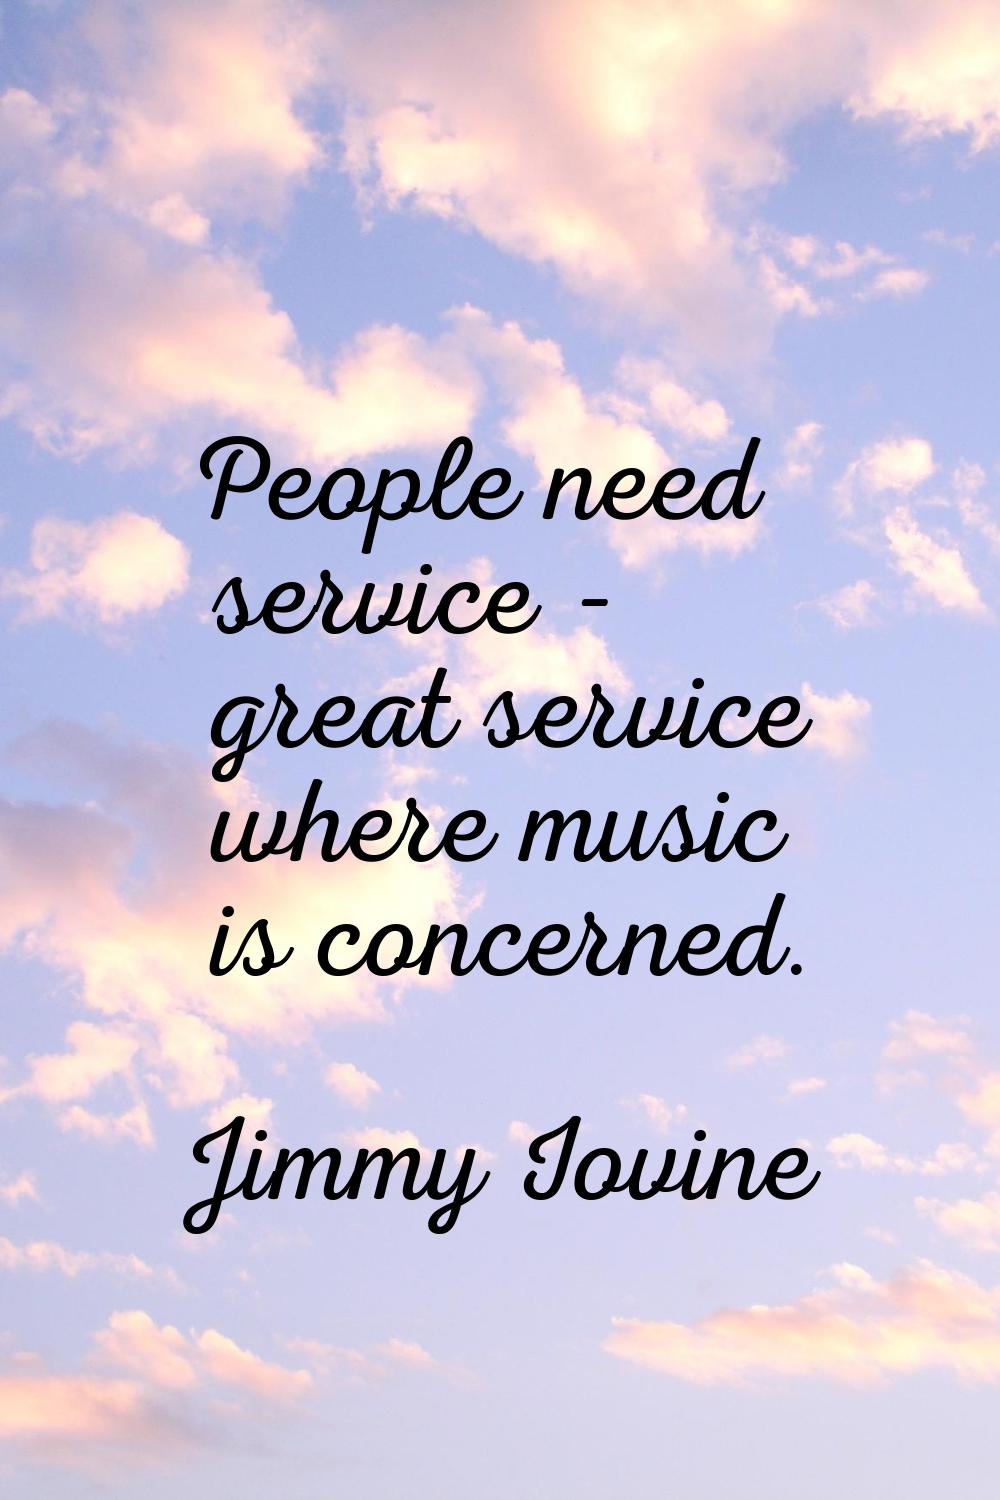 People need service - great service where music is concerned.